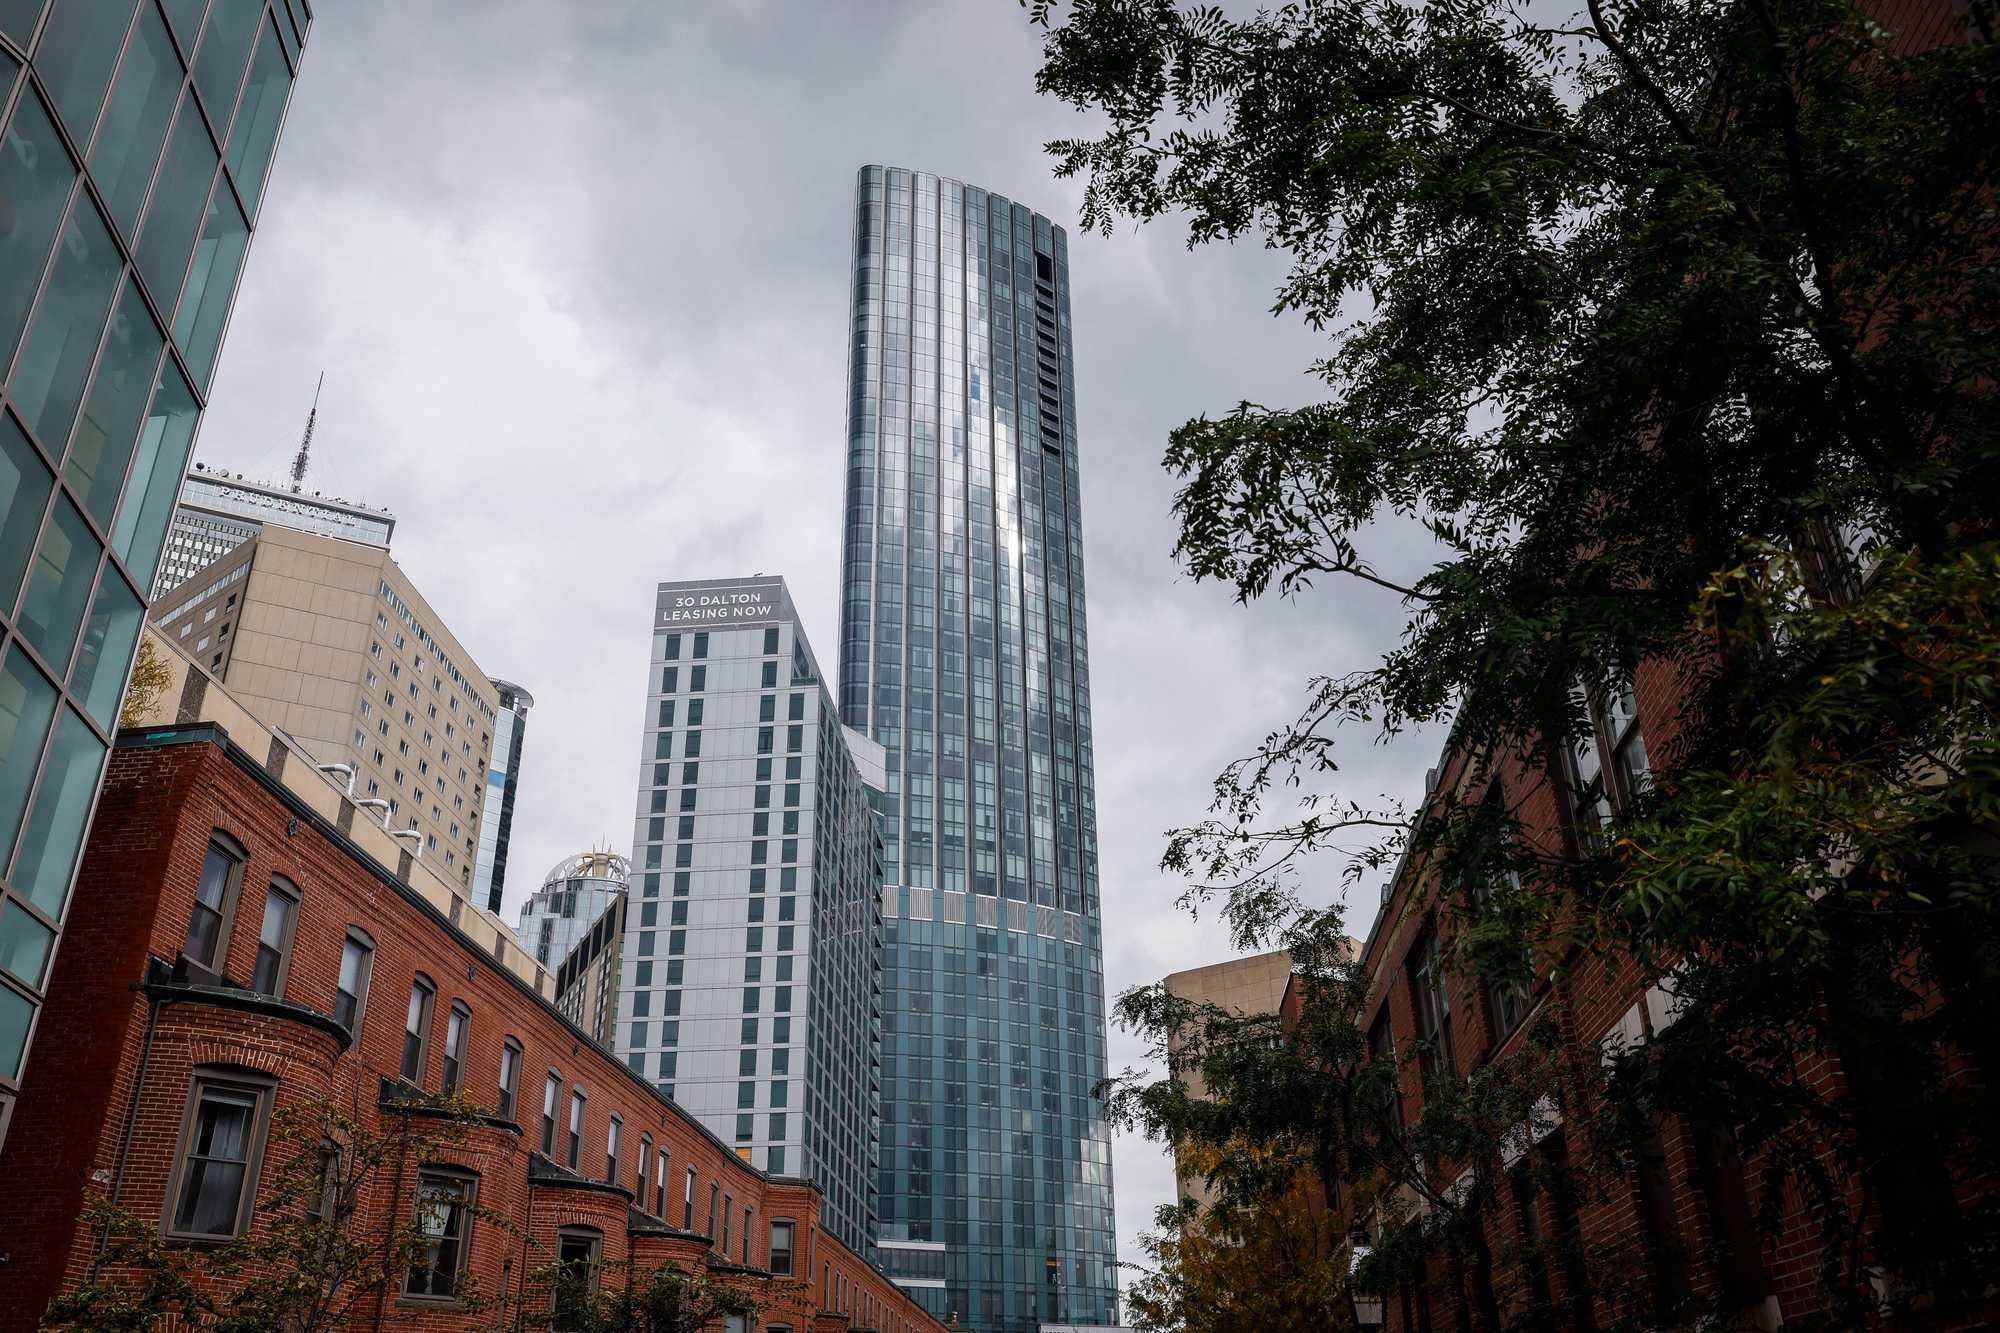 One Dalton, Boston's tallest residential tower, opened in 2019. Condos there have sold for up to $34 million.